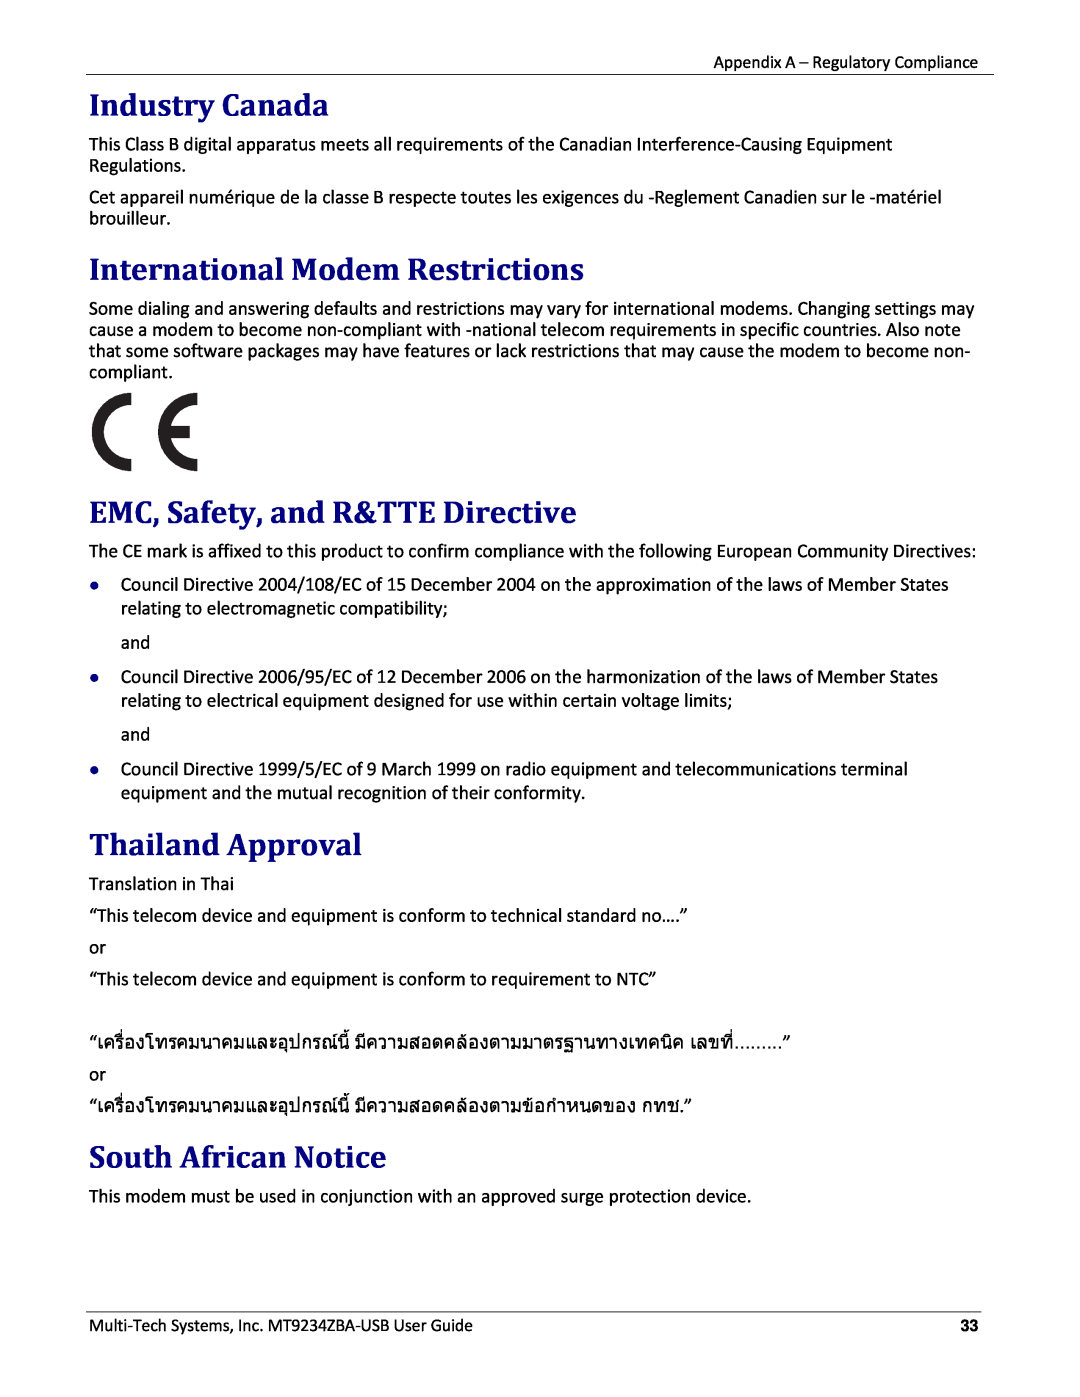 Multitech MT9234ZBA-USB manual Industry Canada, International Modem Restrictions, EMC, Safety, and R&TTE Directive 